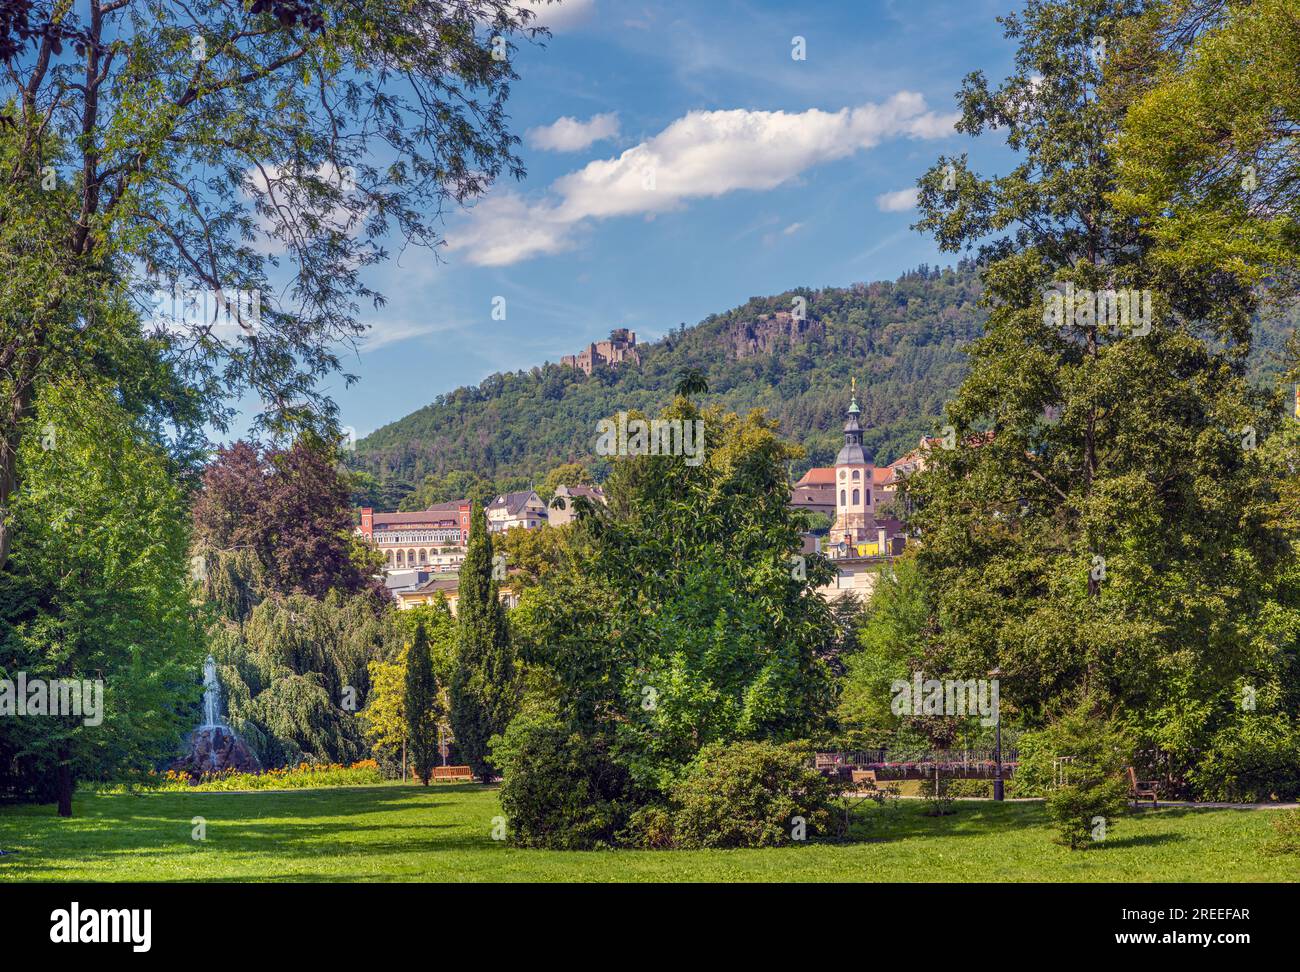 The Lichtentaler Allee in the spa park of Baden Baden   Baden Baden, Baden Wuerttemberg, Germany Stock Photo